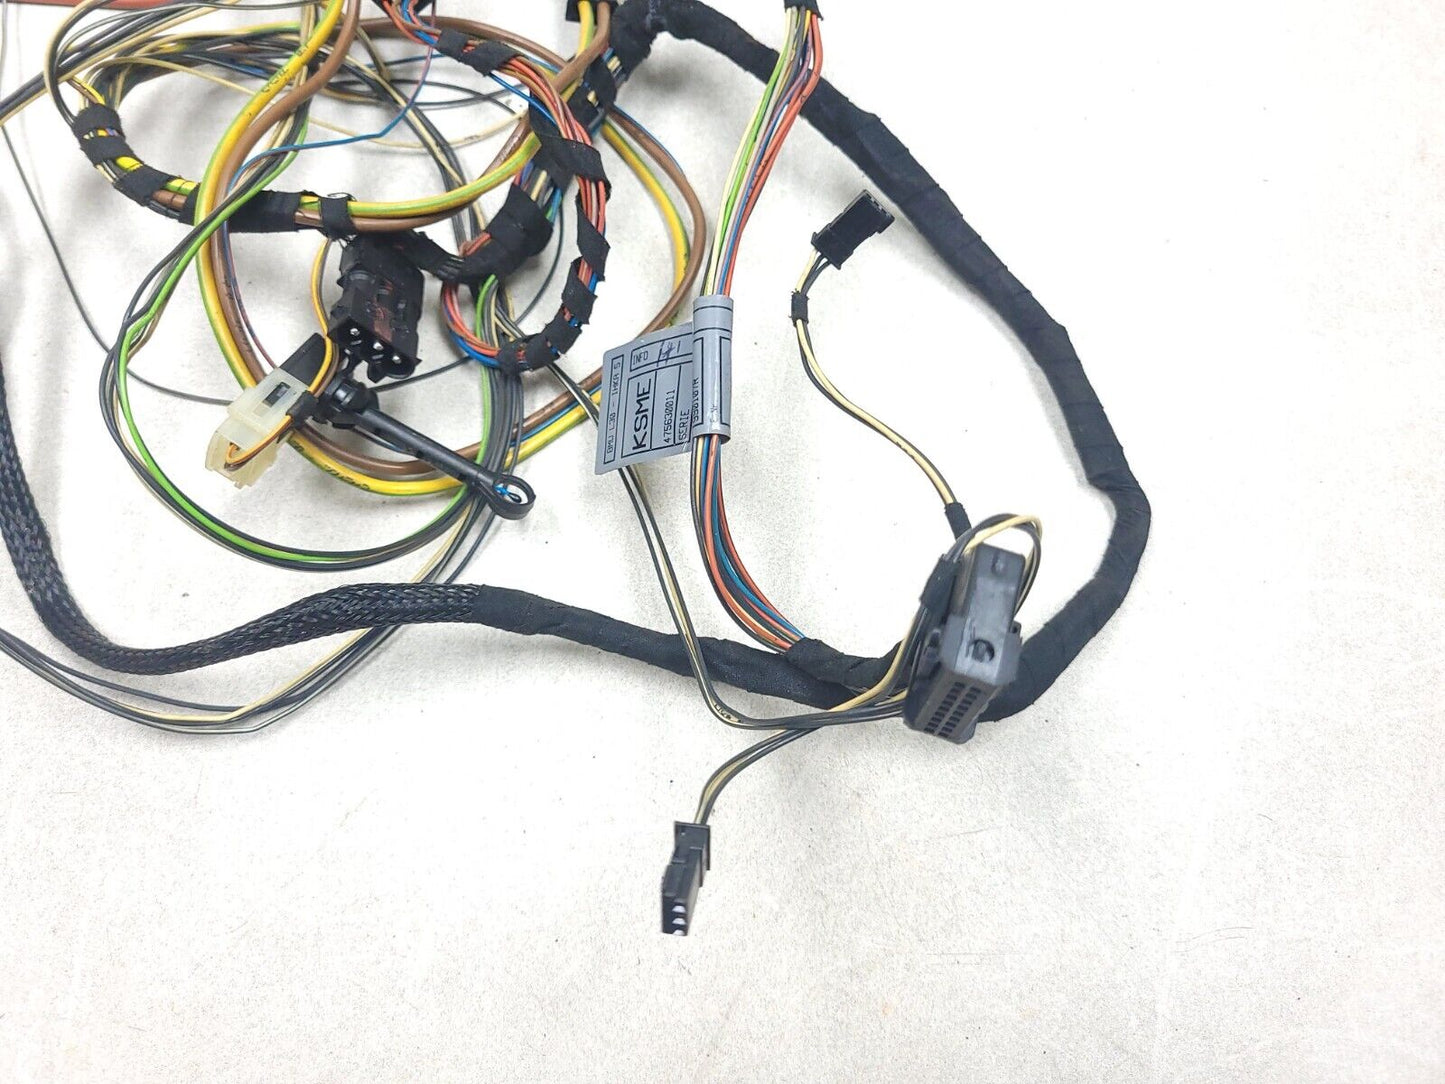 2006-2009 Range Rover Heater Wire Harness OEM